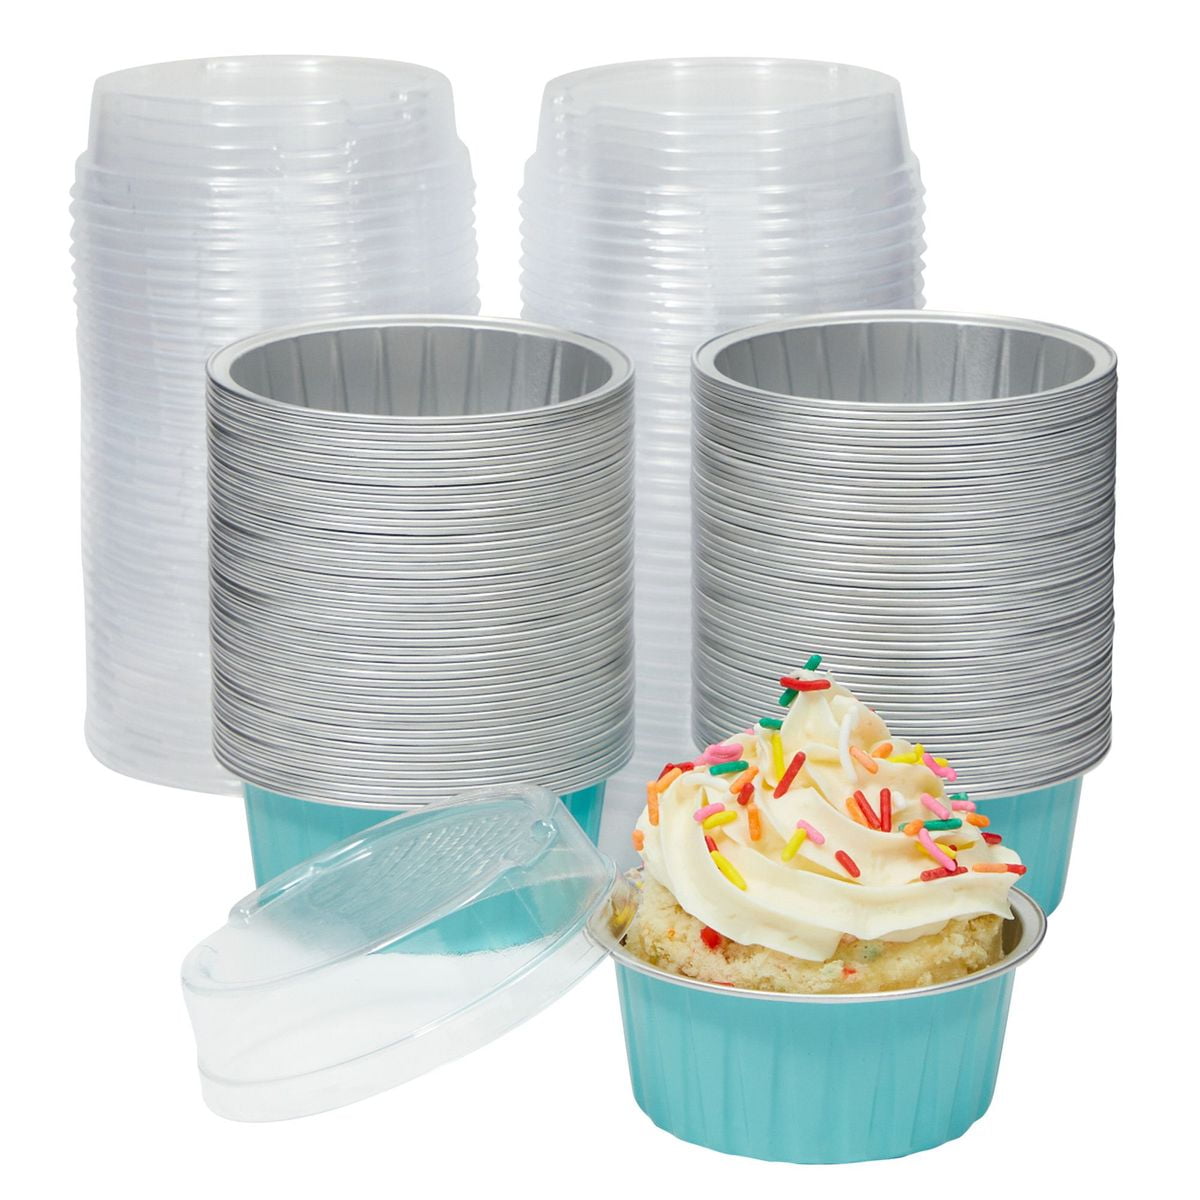 50 Disposable Aluminum 7 oz Baking Cups/Cake Cups/Dessert Cups #1210P by AGIANT